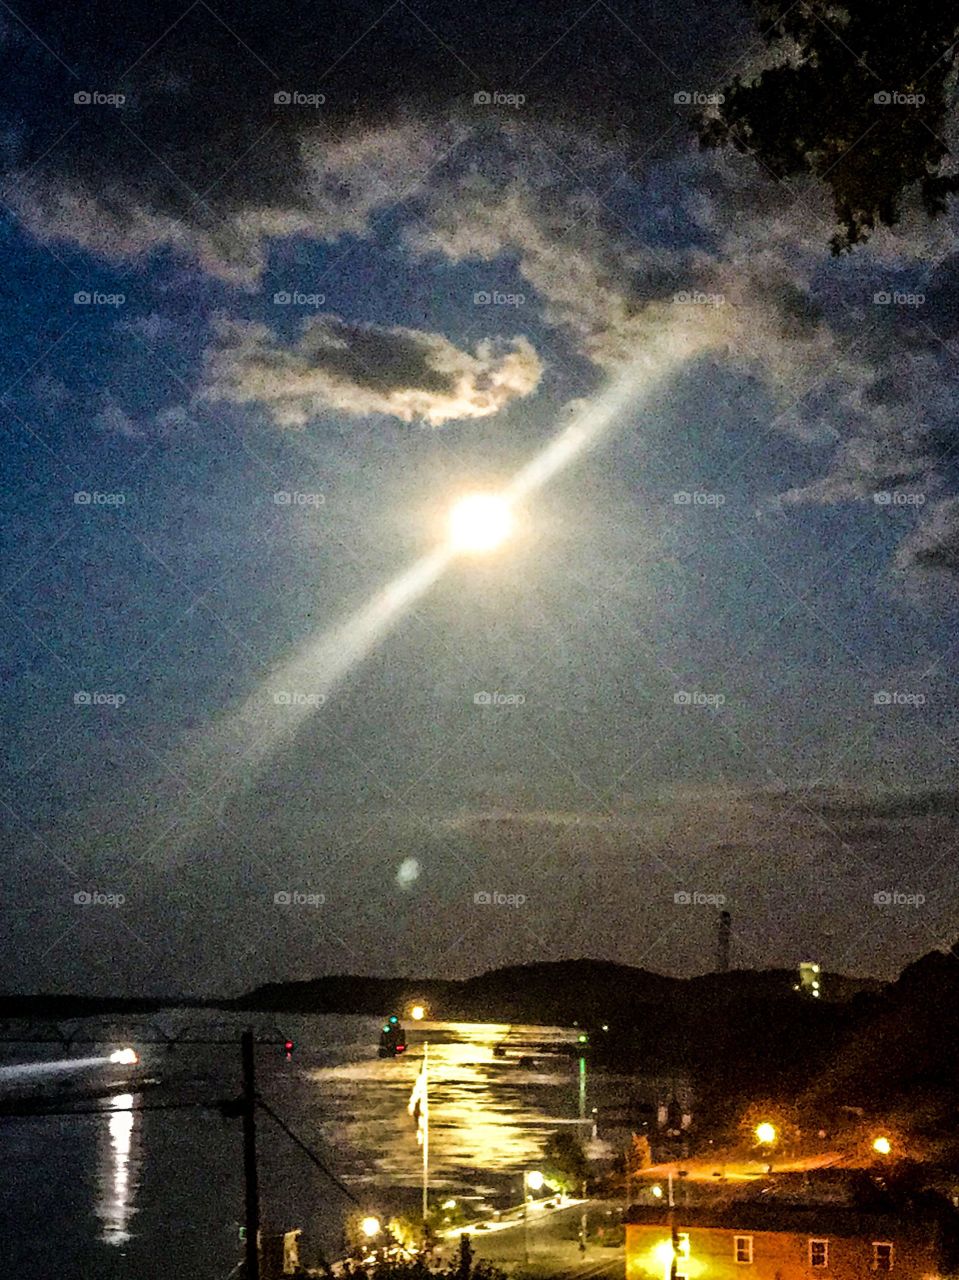 Moonlight over Mississippi bright and beautiful.